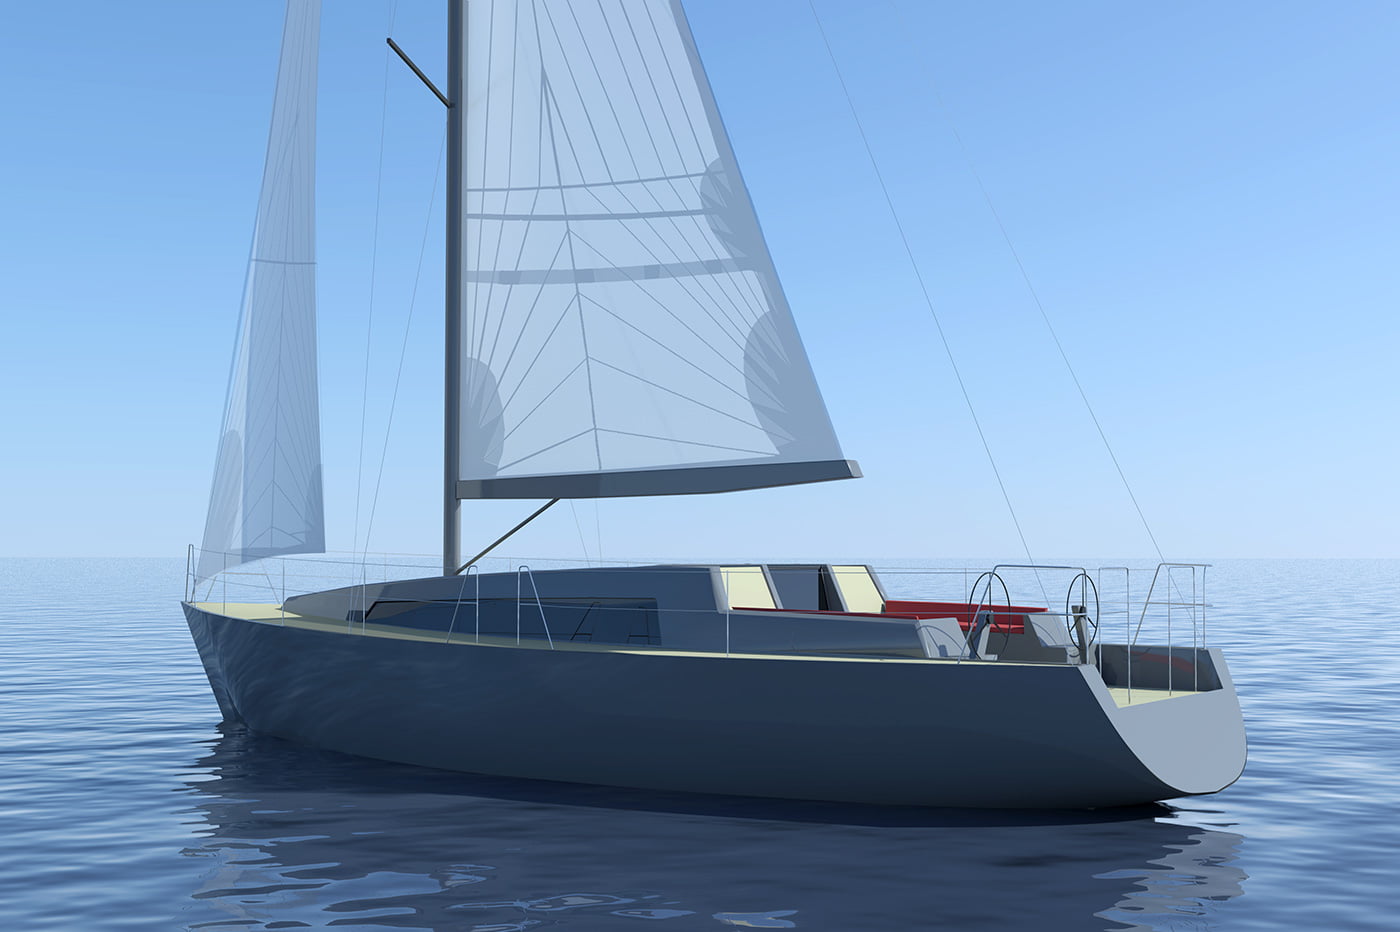 Sea sailing yacht sloop type exterior design view from side